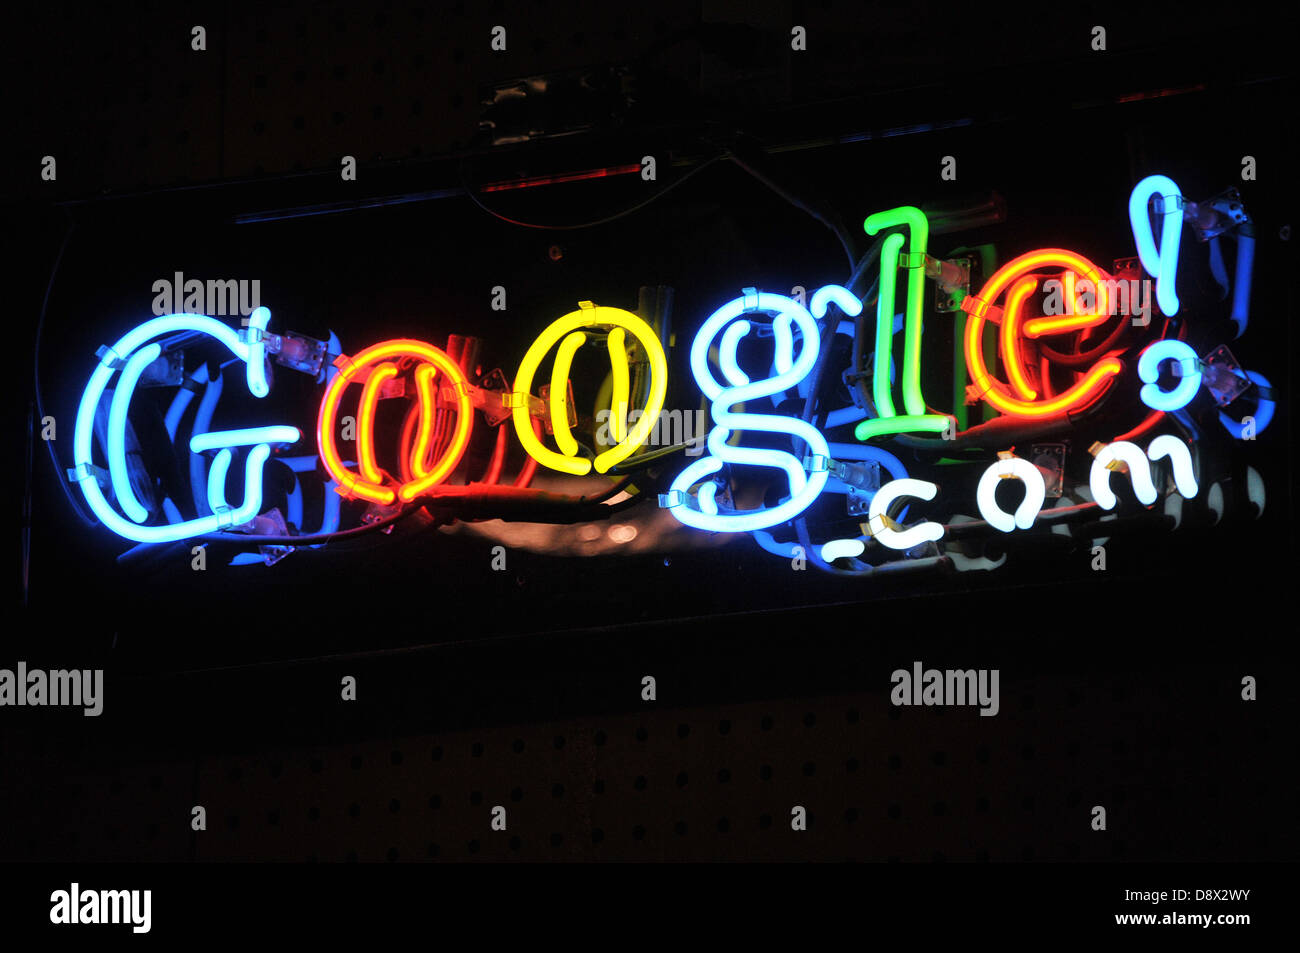 Neon Google sign in the Googleplex - Google's global headquarters in Mountain View Silicon Valley California. EDITORIAL USE ONLY Stock Photo